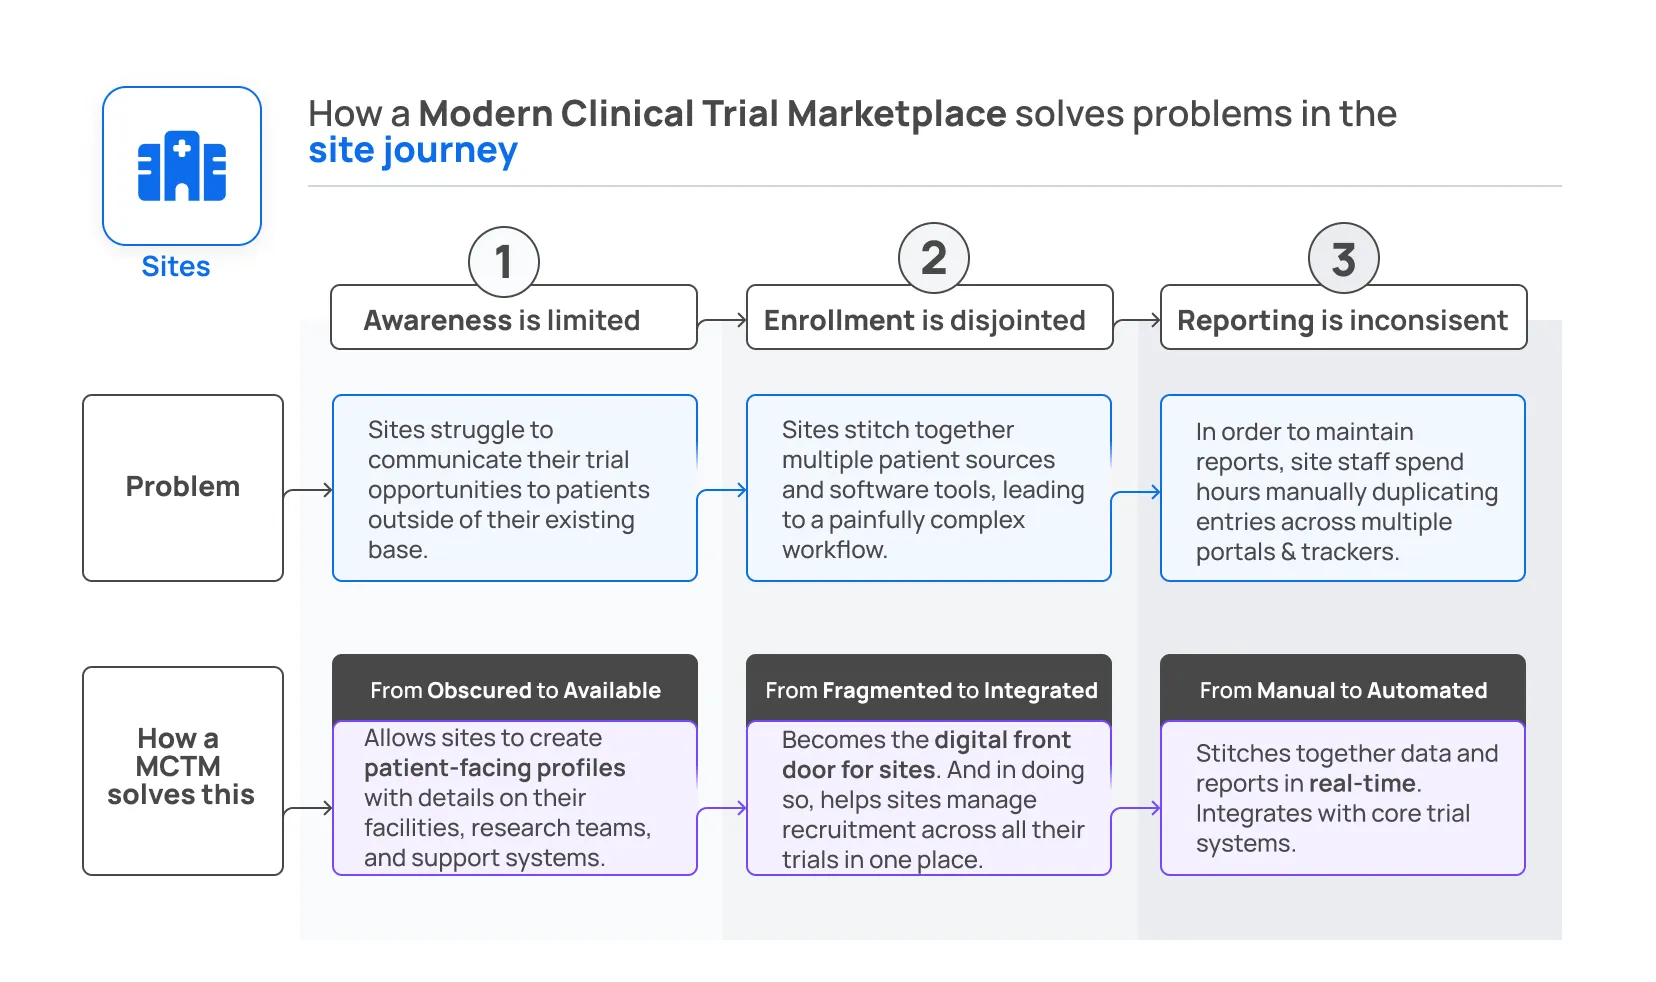 How a Modern Clinical Trial Marketplace solves problems in the site journey